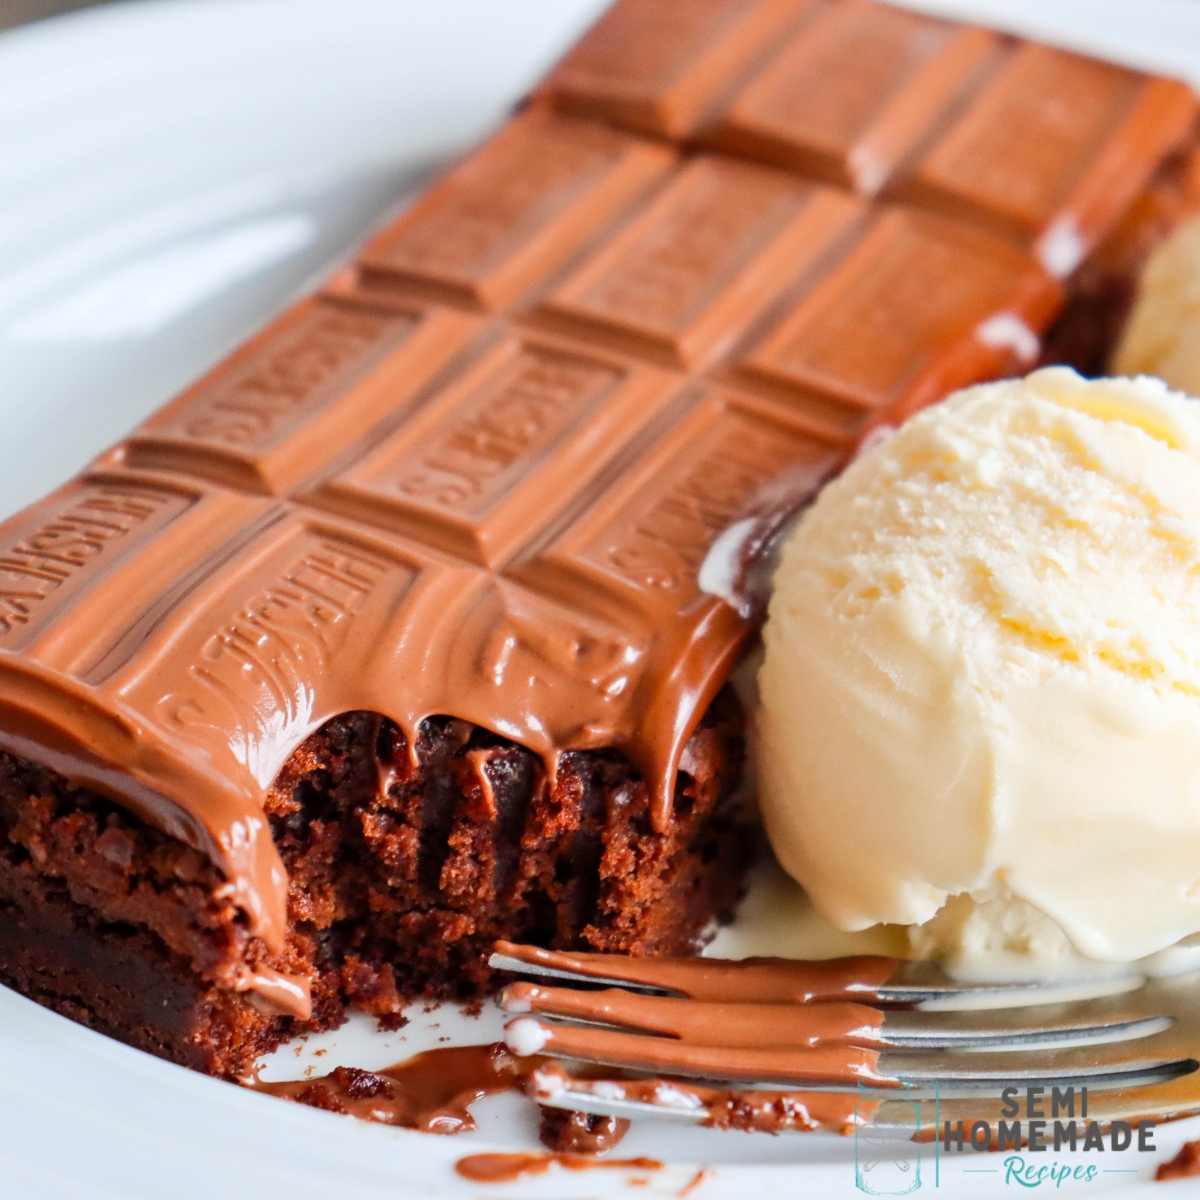 The Hershey© Brownie from Texas Steakhouse is a dessert that reminds me of going out to eat when I was a kid! It's a warm brownie with an entire Hershey© chocolate bar melted on top and served with vanilla ice cream!